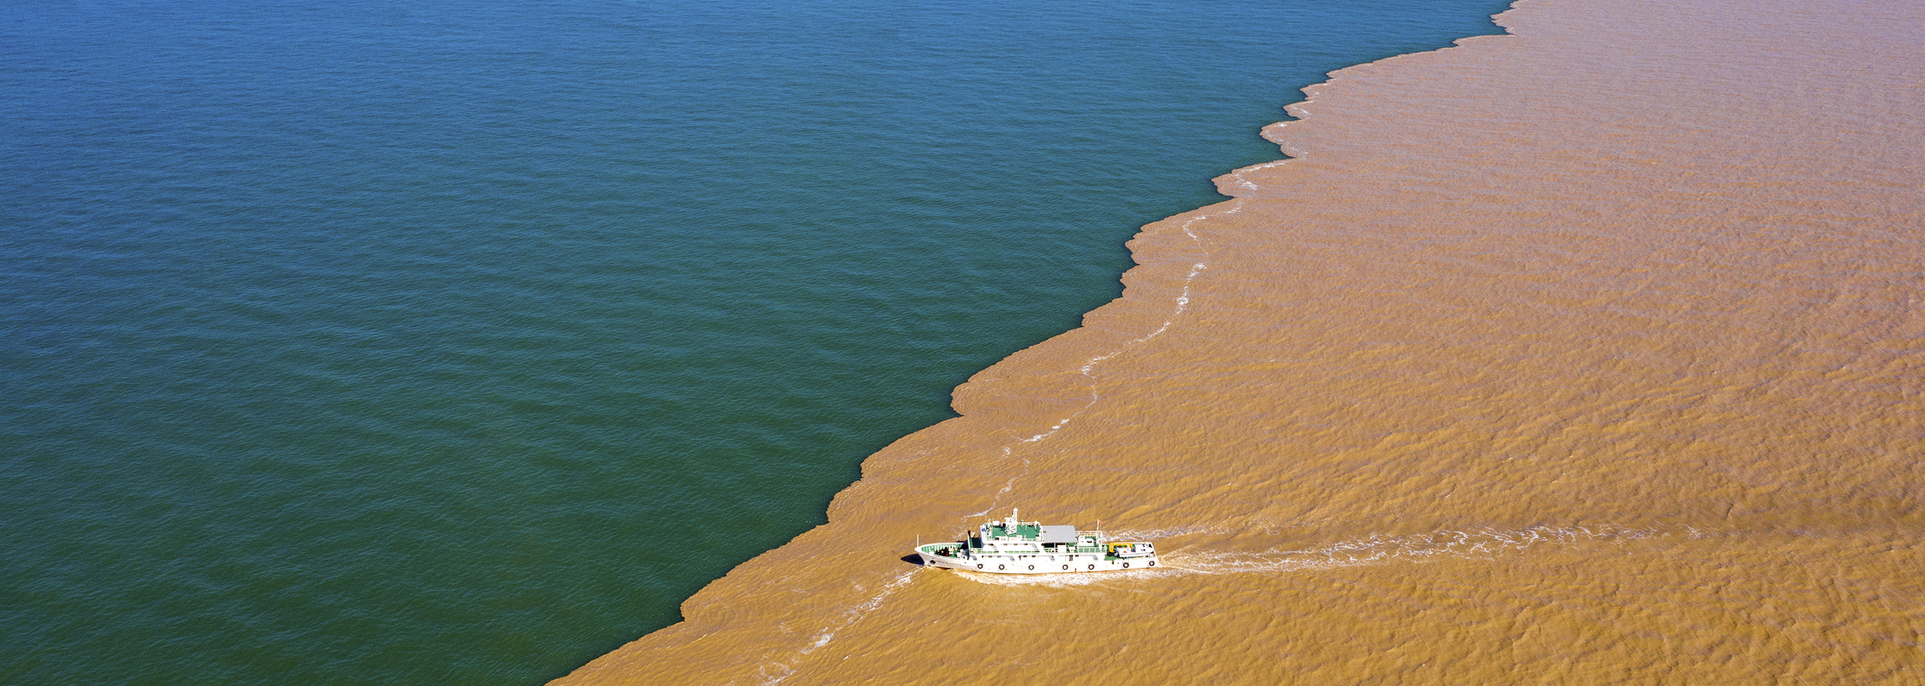 Magnificent Yellow River enters the sea in Dongying